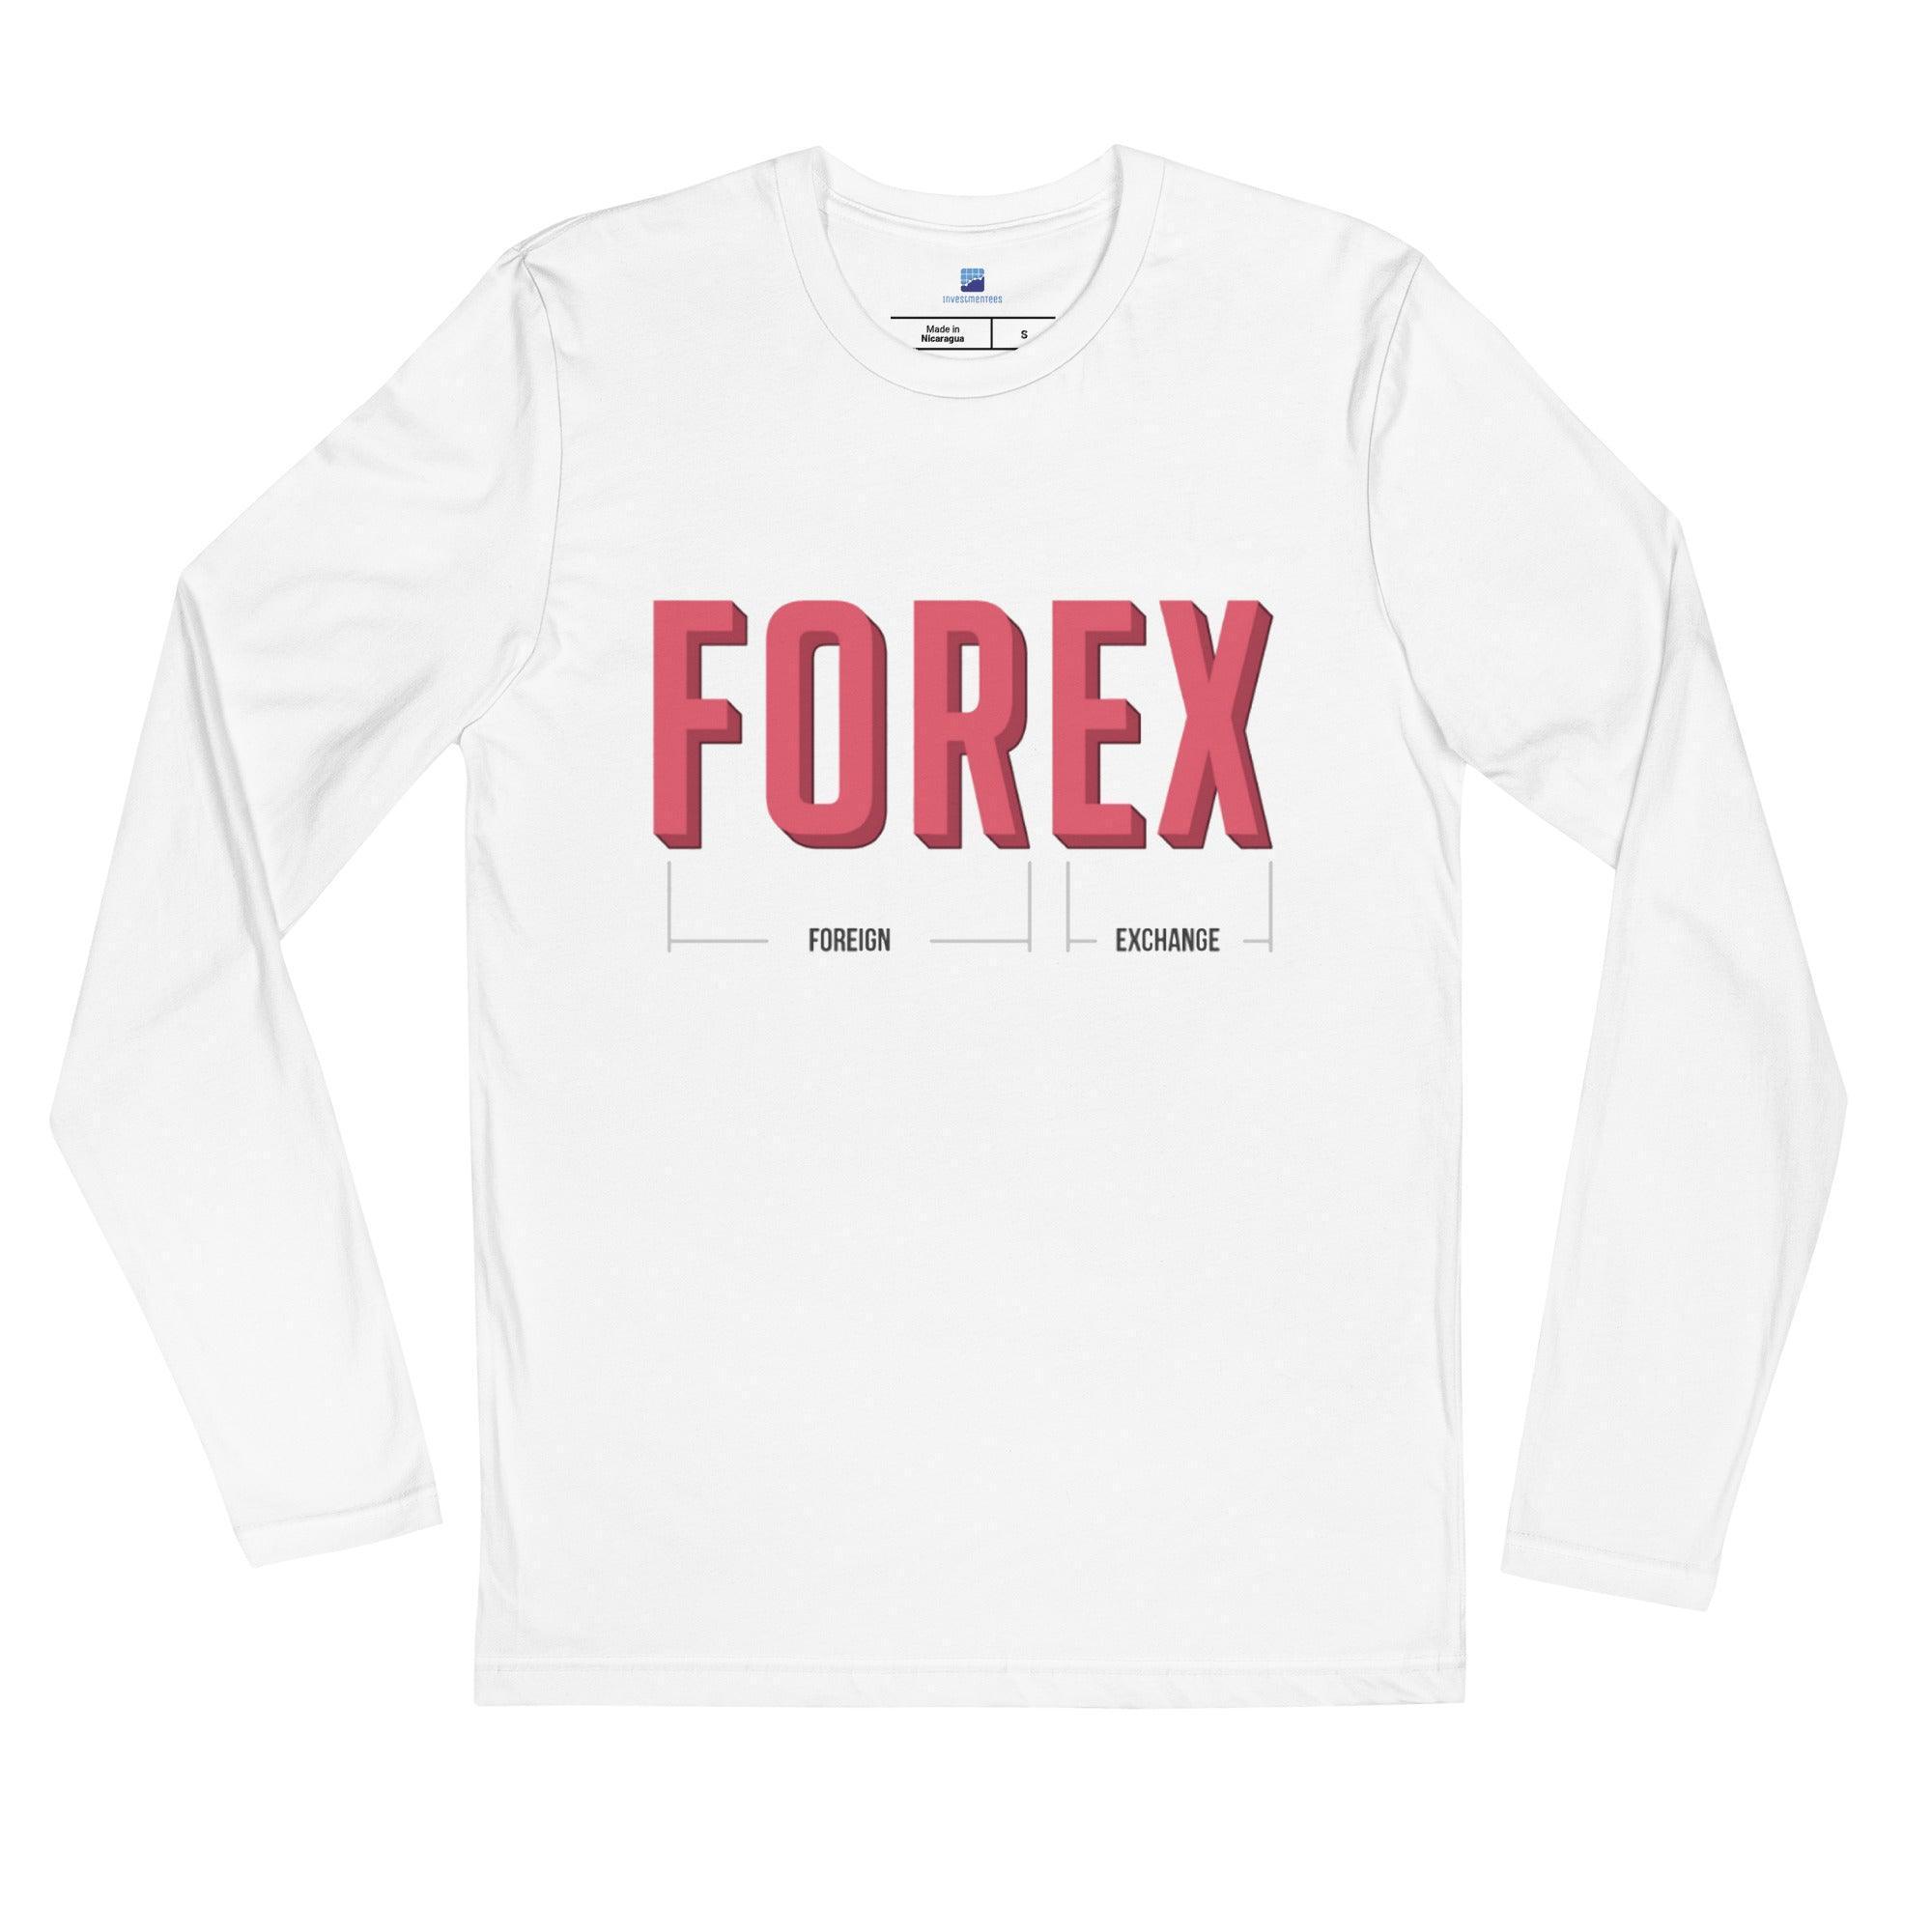 Foreign-Exchange | Forex Long Sleeve T-Shirt - InvestmenTees